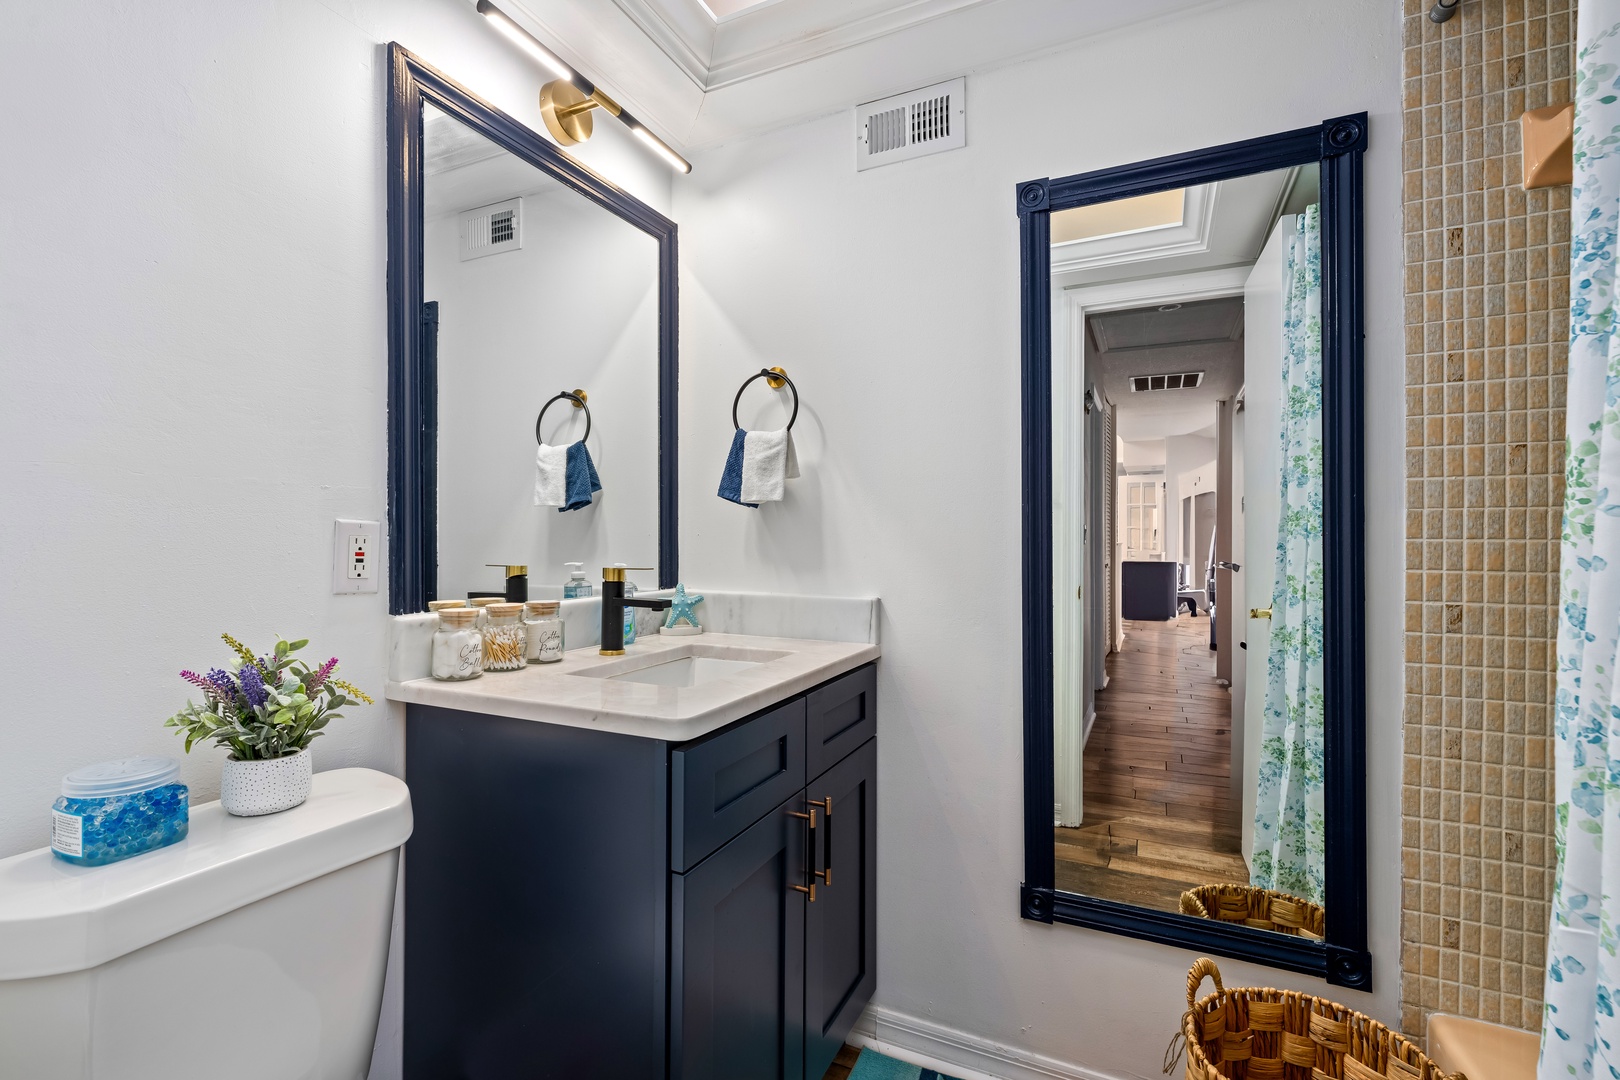 Elegance abounds in the hall bath, with a single vanity & shower/tub combo